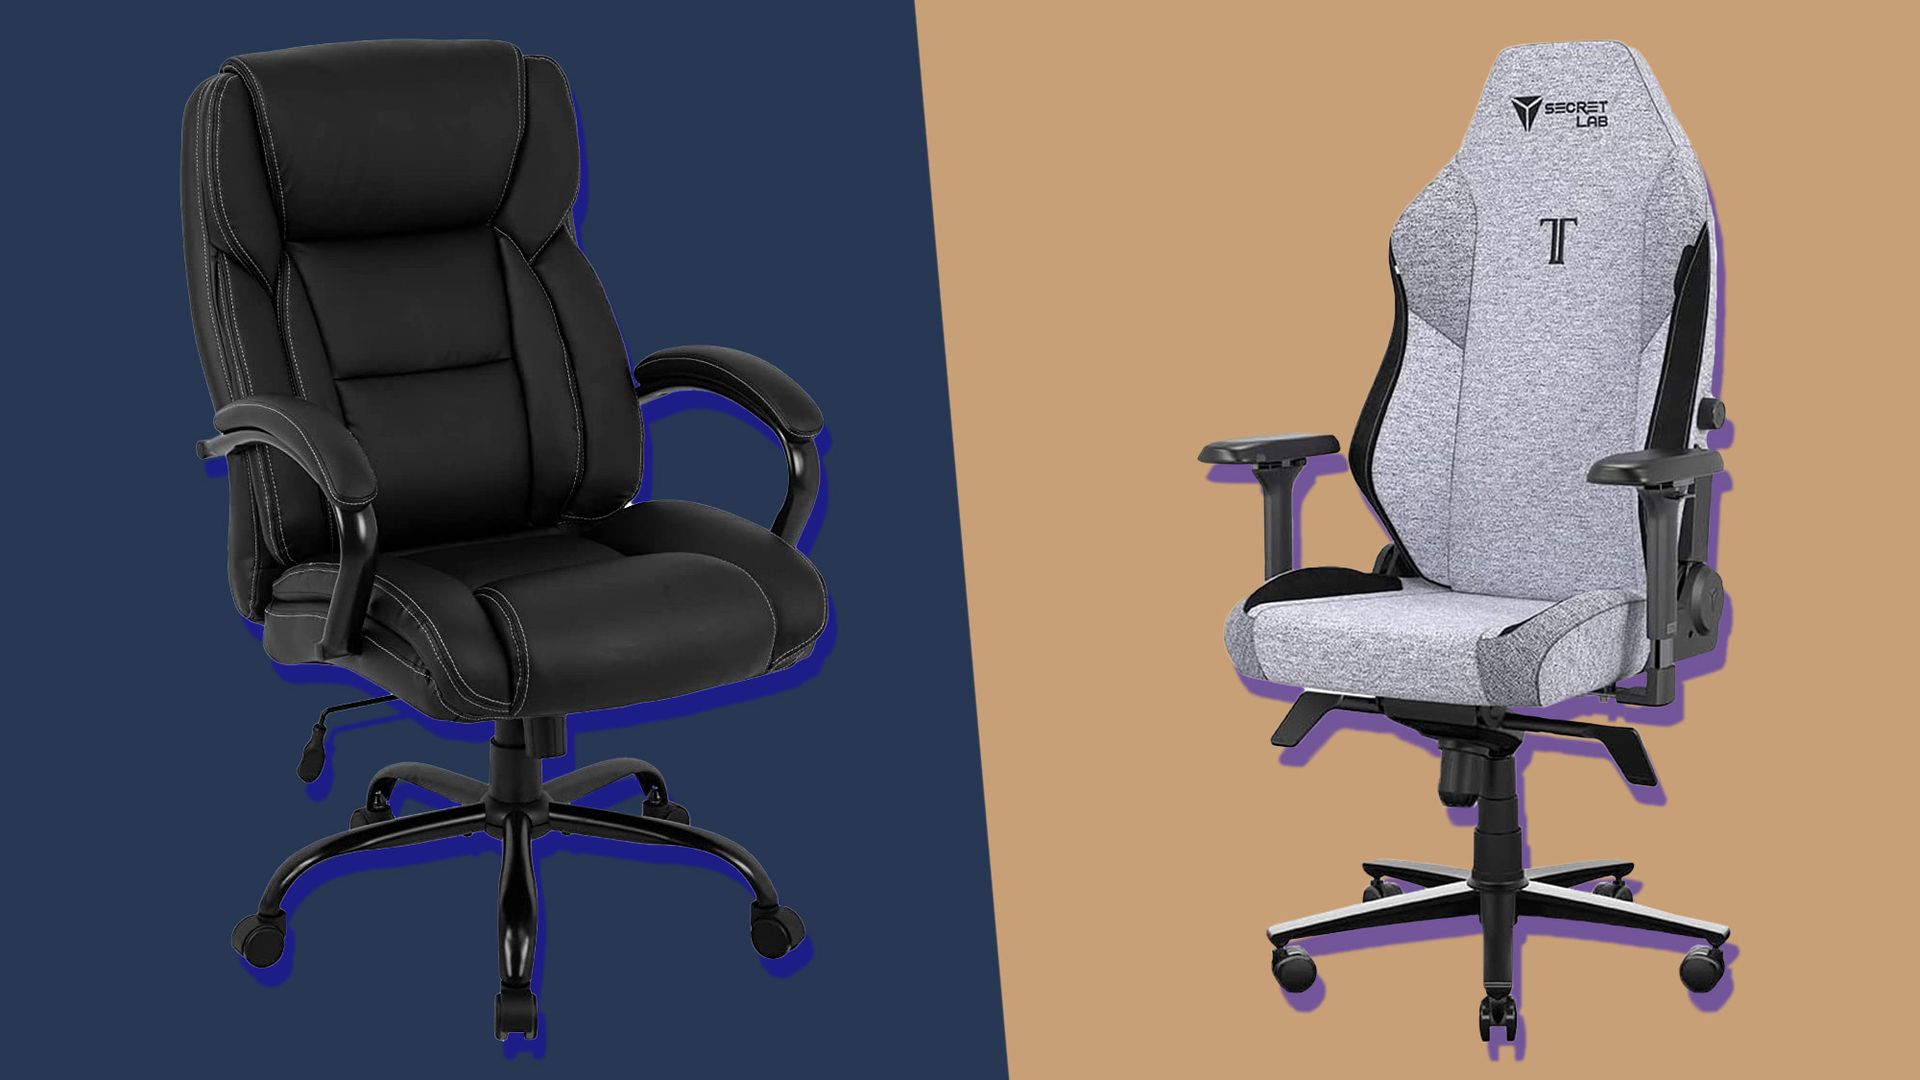 What Is The Difference Between A Gaming Chair And An Office Chair